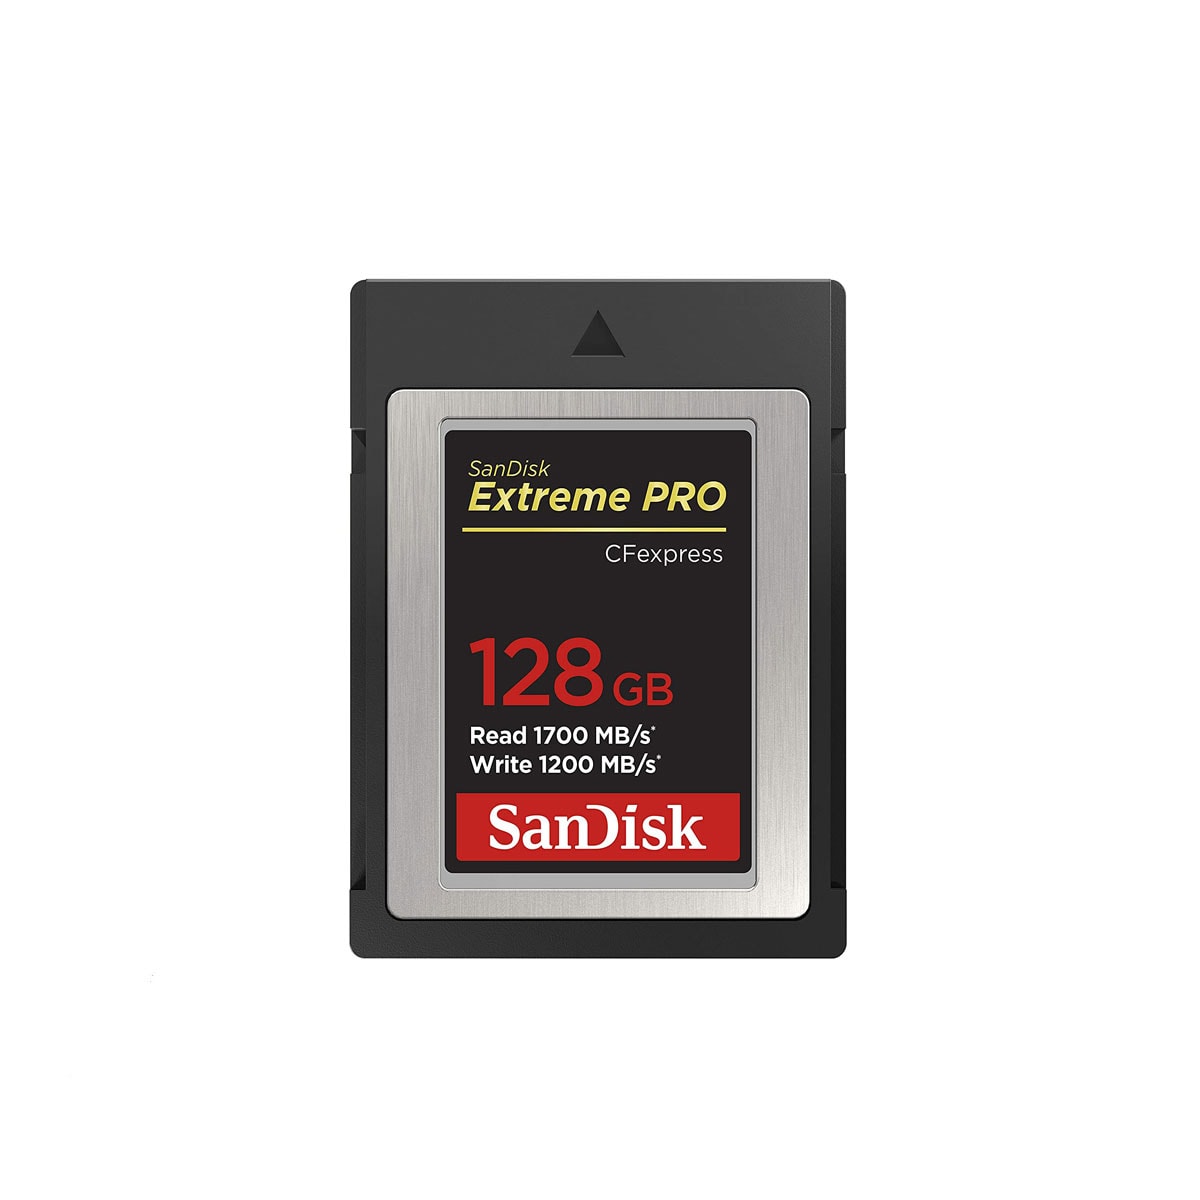 Sandisk CFexpress Type B Card, 128GB, 1700MB/s